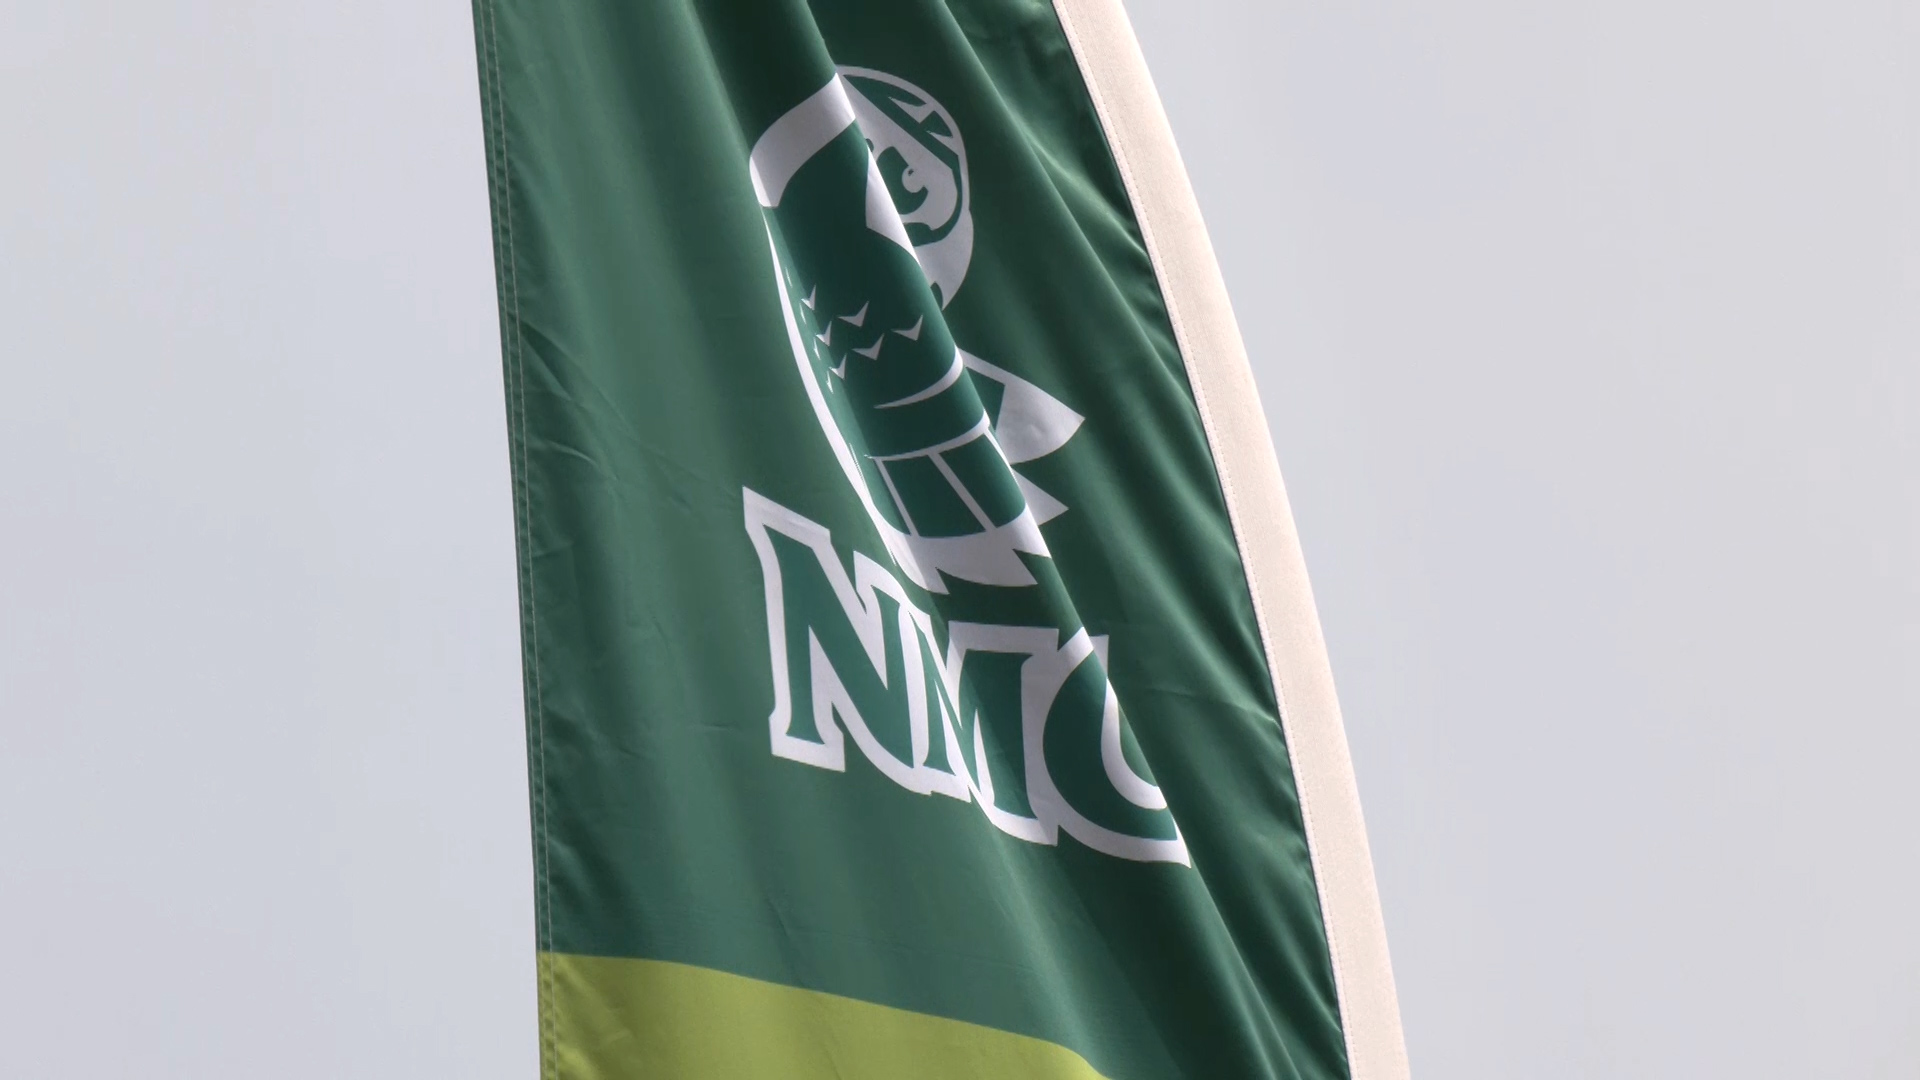 NMC considers millage to expand college, reduce cost for students in Benzie Co.